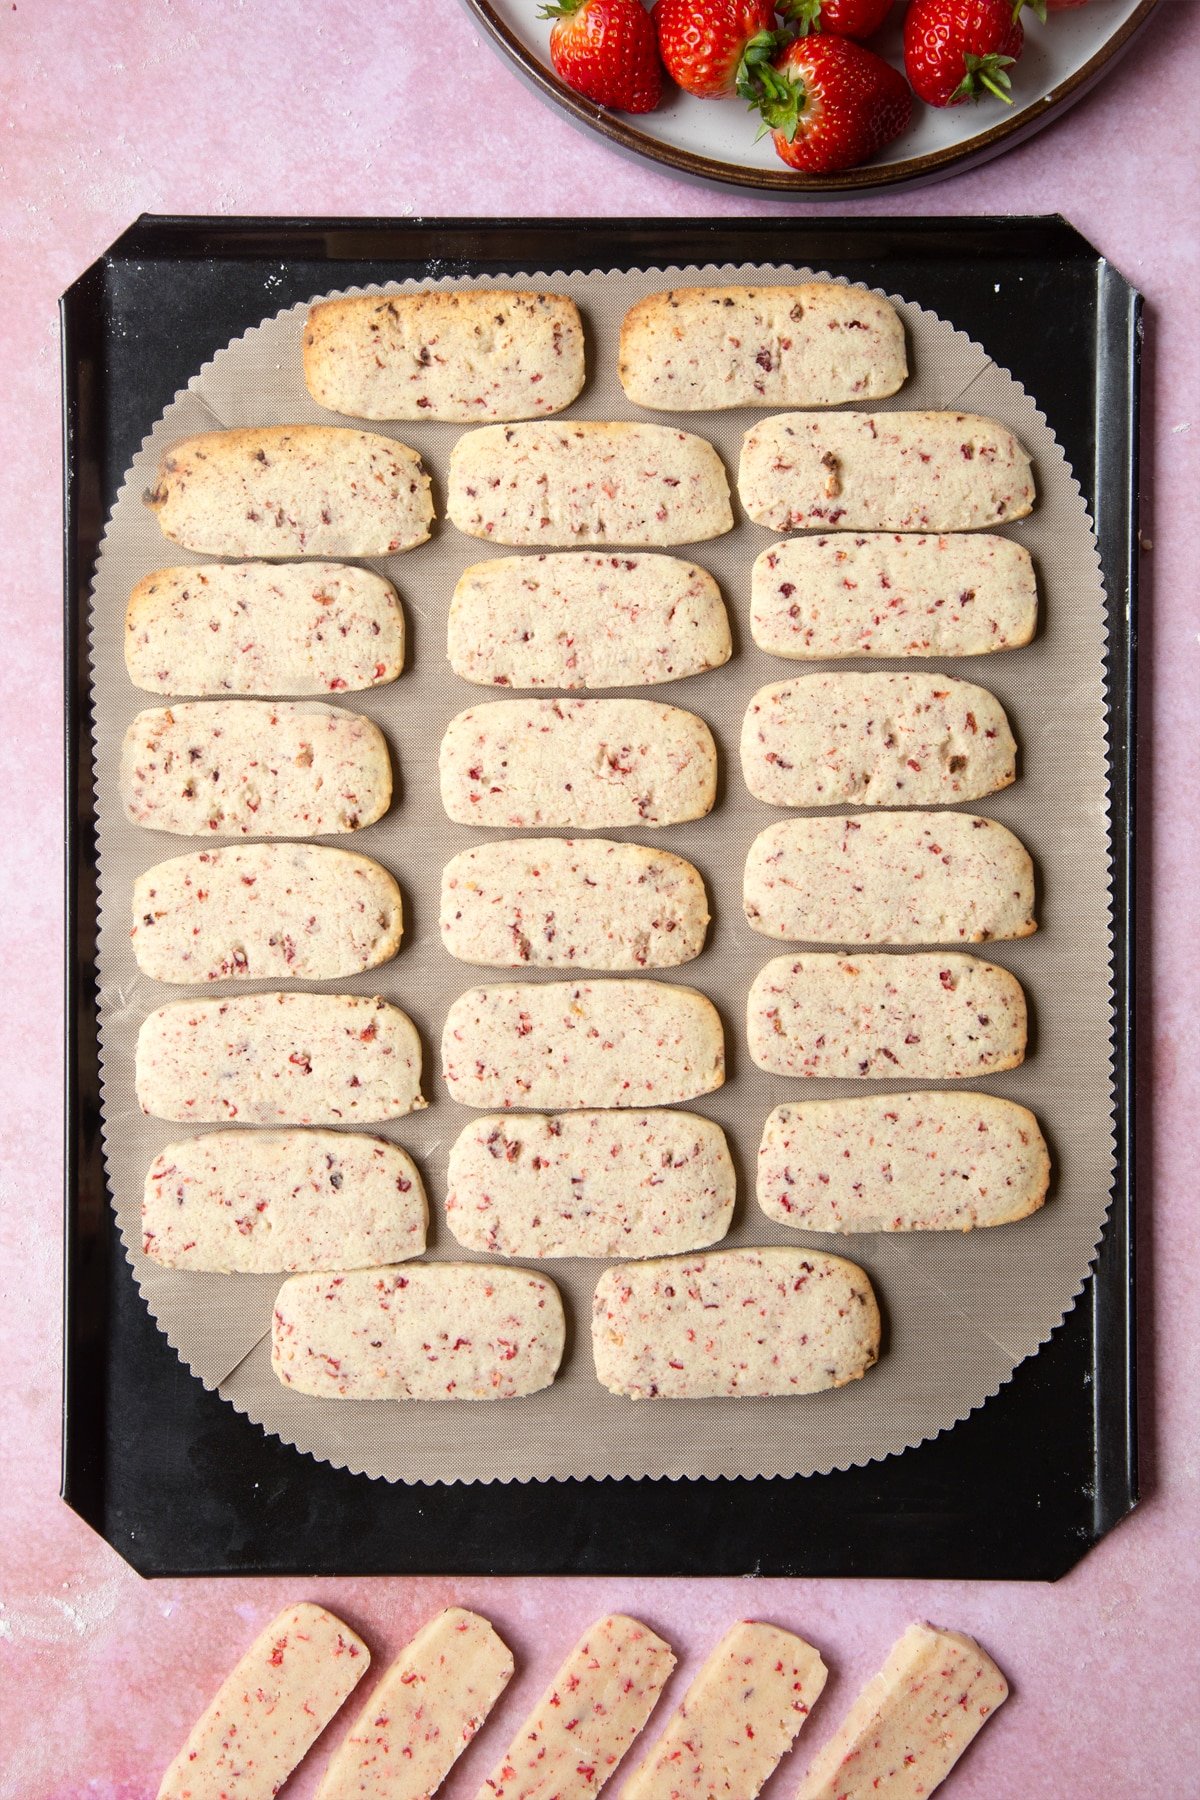 The strawberry biscuits having been baked in the oven for five minutes.